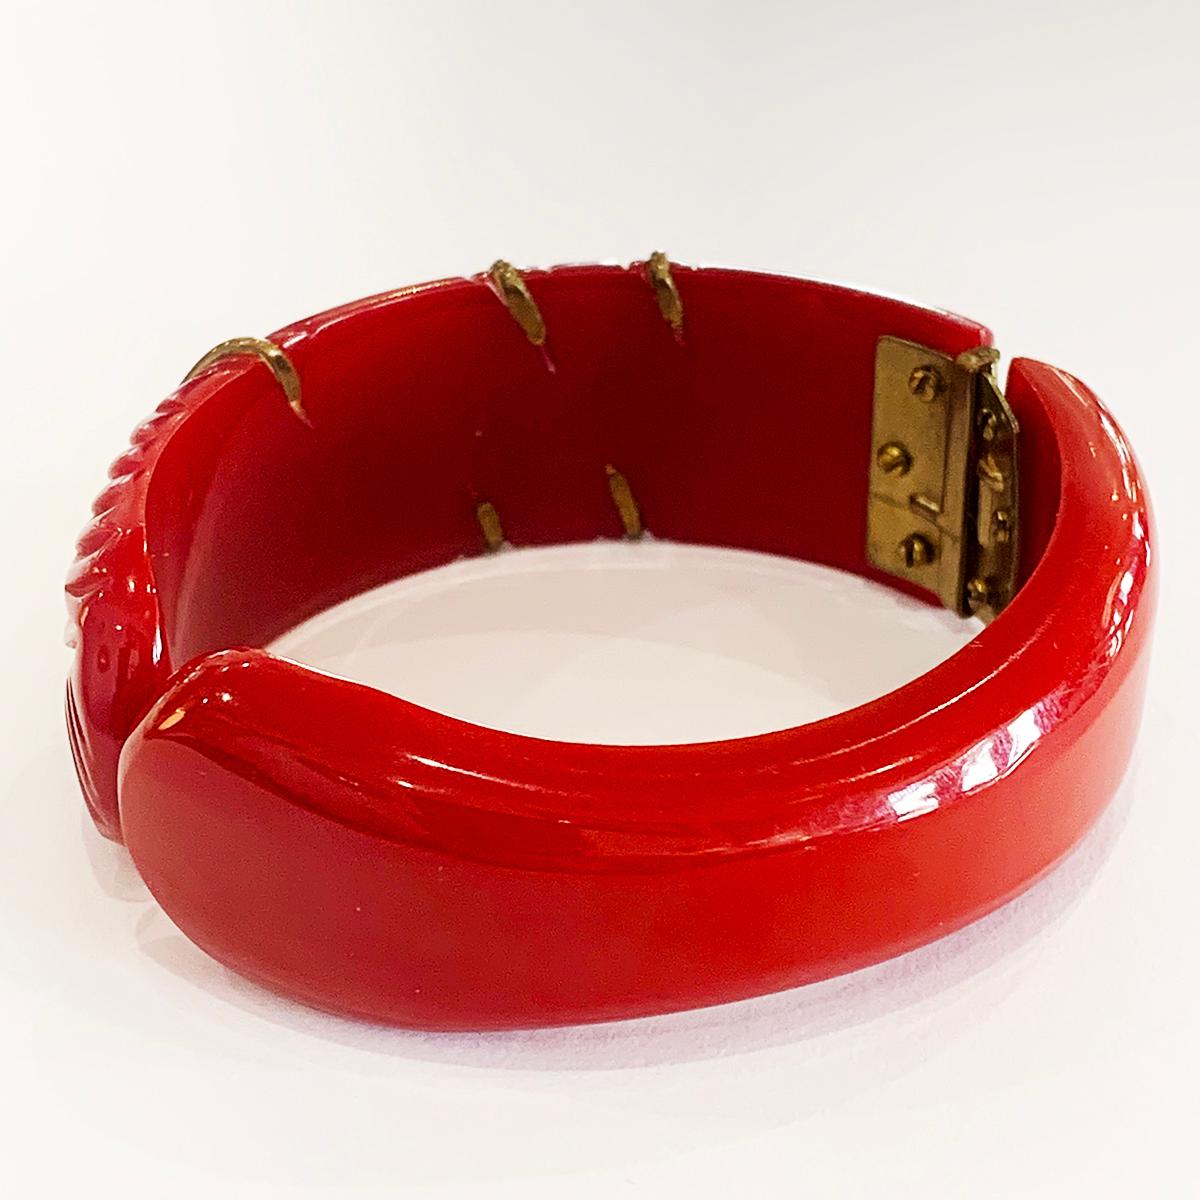 Art Deco Carved Red Bakelite with Gilt Bronze Flower, Leaf and multiple bands to the carved recesses. Typical Deco Asymmetrical Carvings offset to one side of bangle. All attachments, bands, etc., are pinned or rivetted and multi tiny screws to